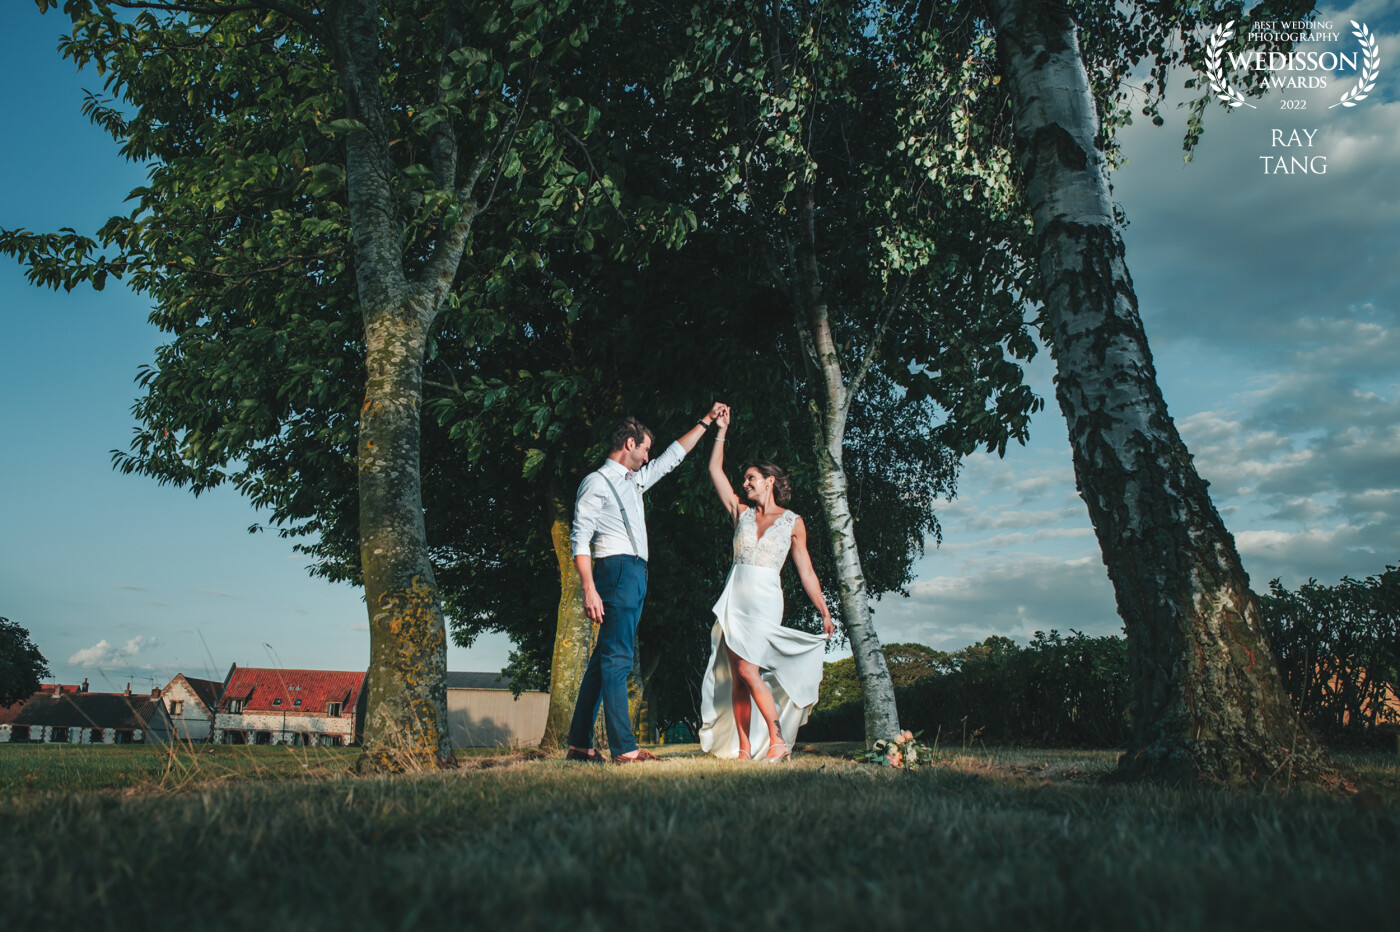 This wonderful couple of Sarah & Pax took there time for the photos.  I loved the way the moved and looked at each other so I'd asked if she can do a twirl for this image between the trees.